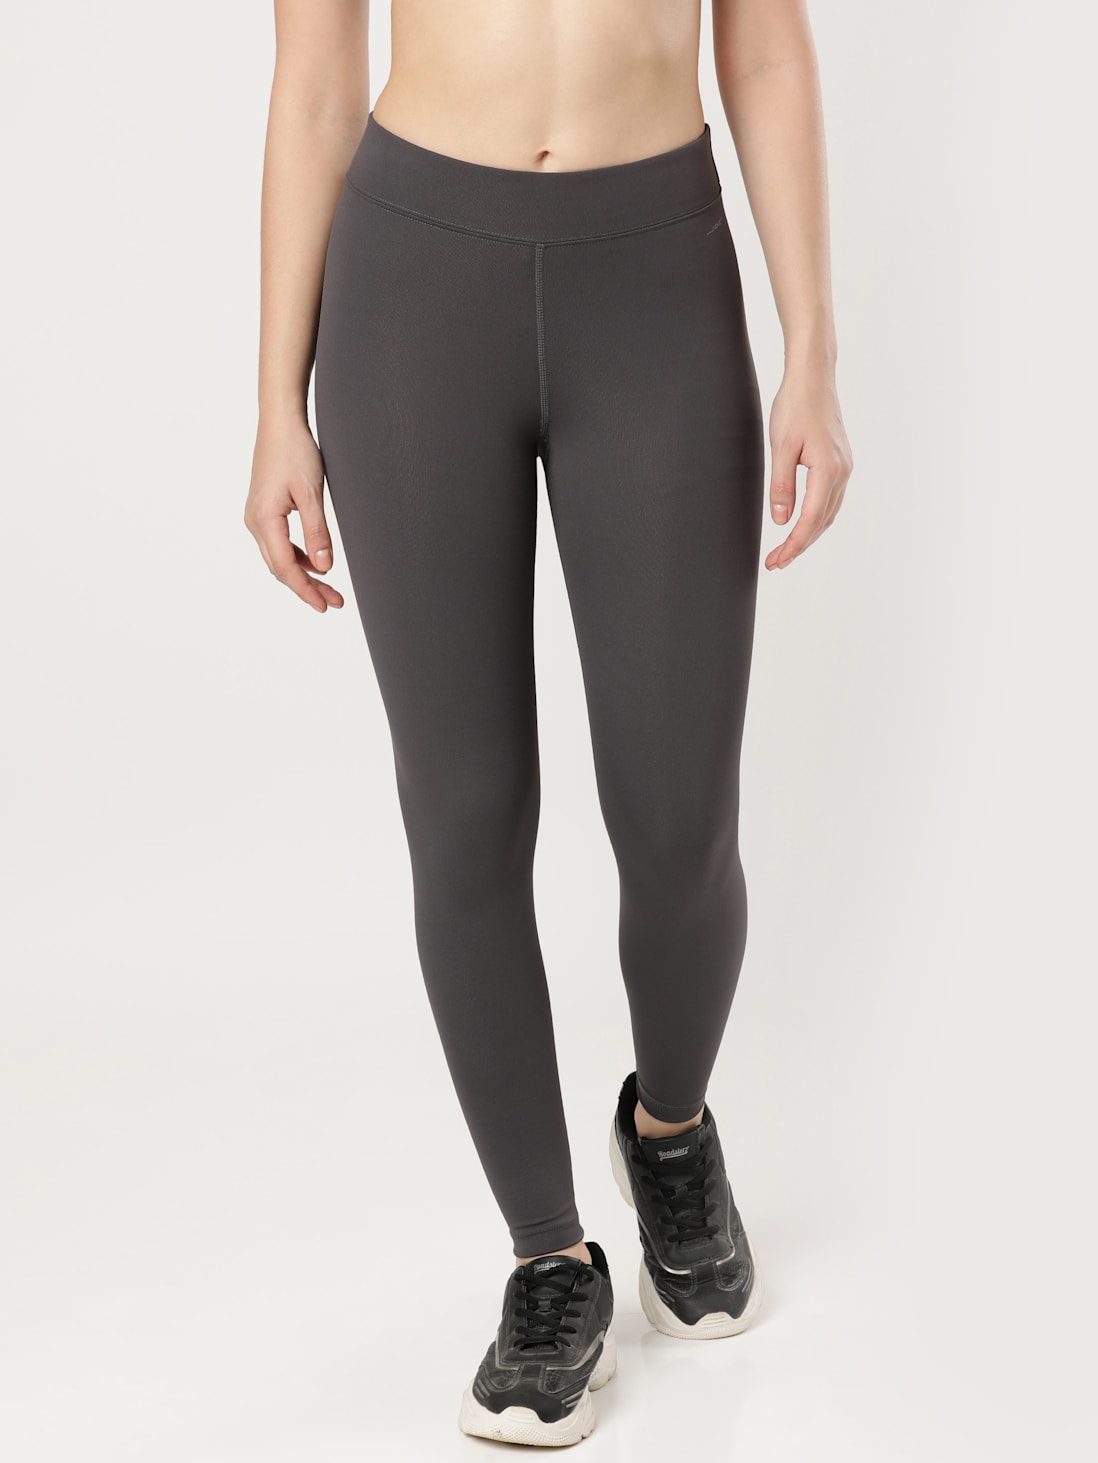 Buy Women's Microfiber Elastane Stretch Performance Leggings with Broad  Waistband and Stay Dry Technology - Forged Iron MW20